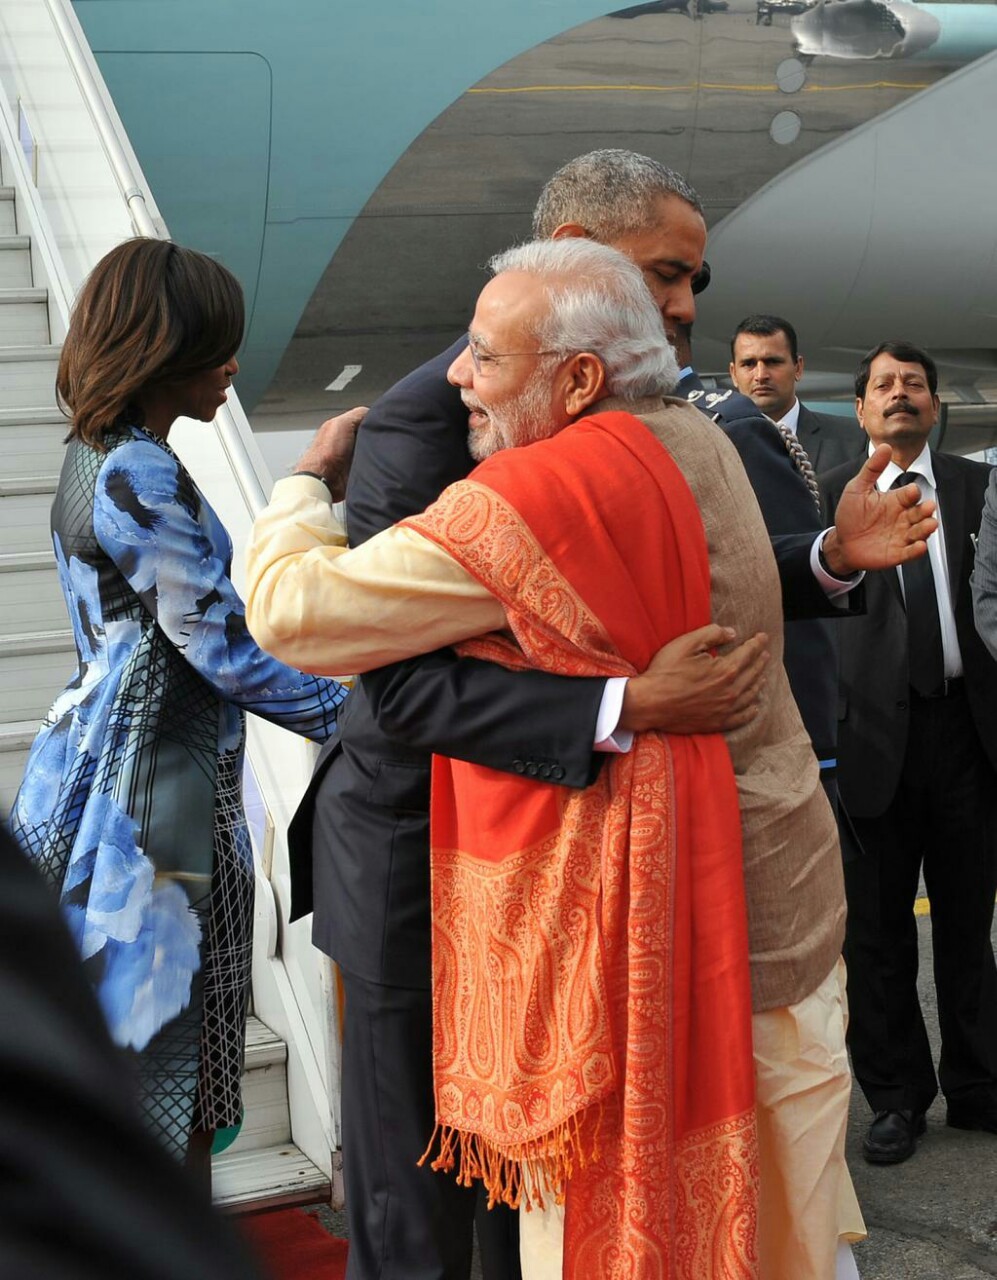 President Obama and Prime Minister Modi engaging in a widely televised bear hug. (Tumblr/generalsecretaryofthecpp)